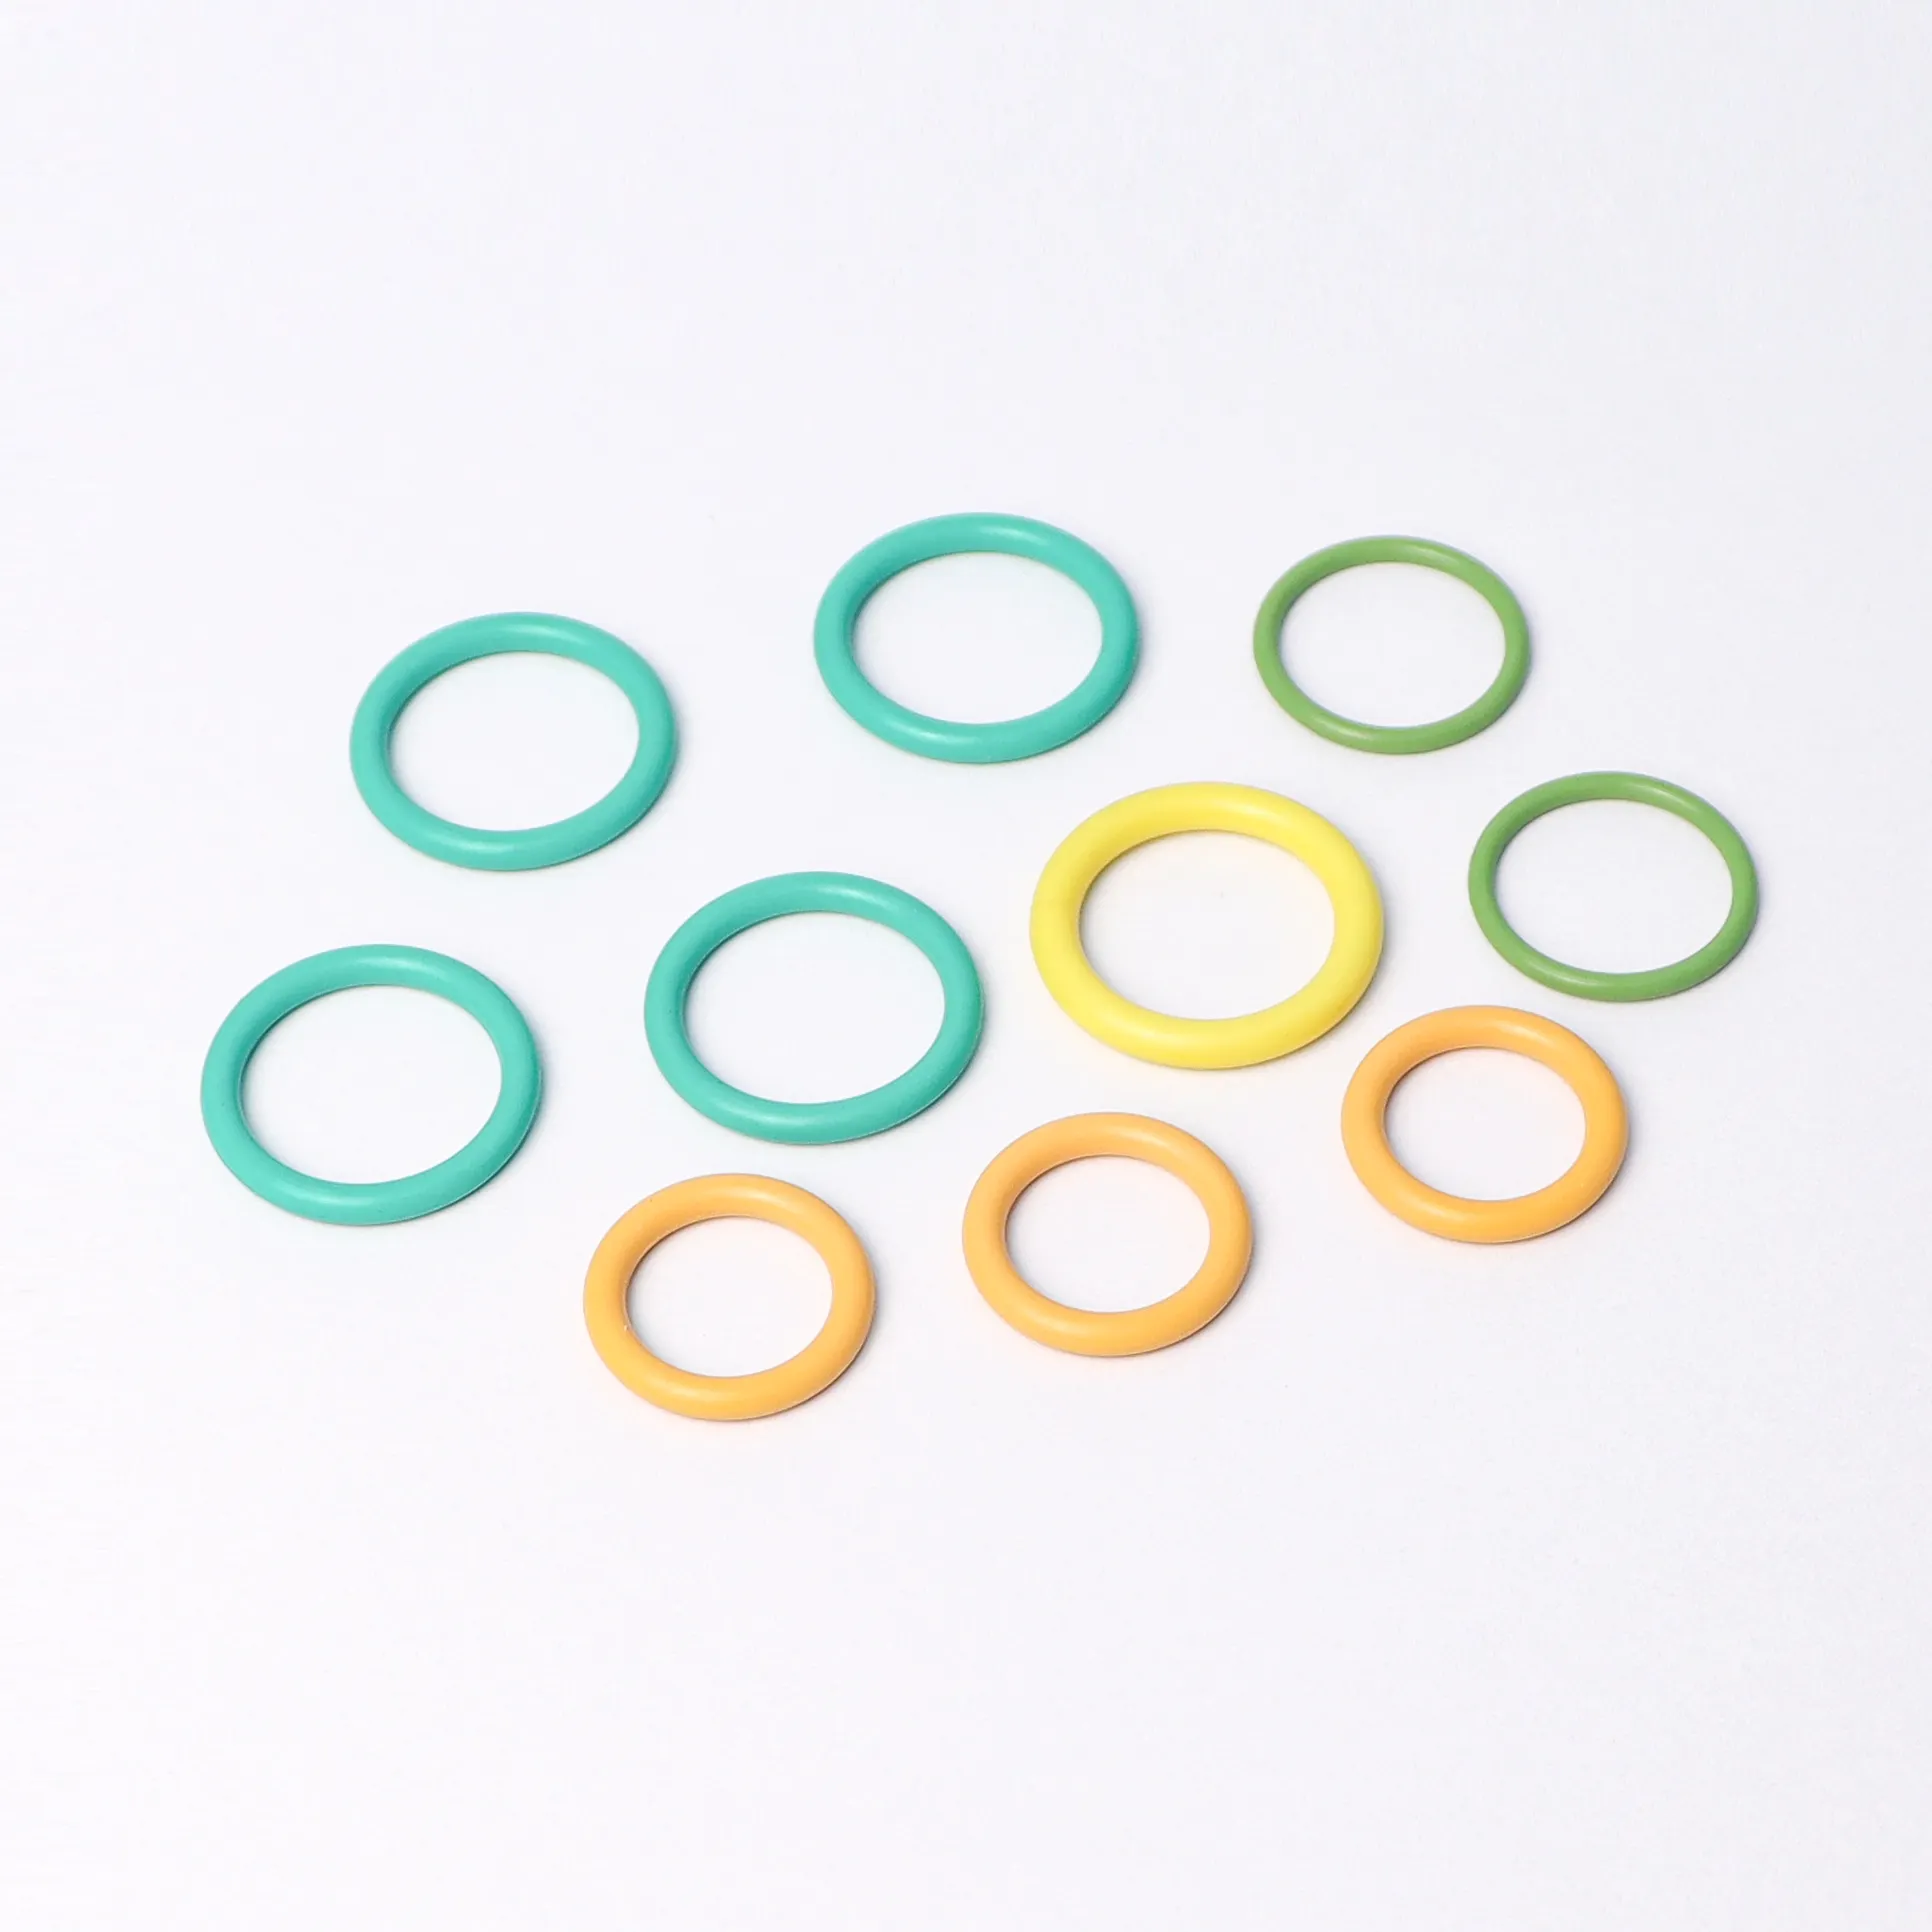 Any size o-ring 10mm 12 mm 15 mm 20mm 23mm 25mm 33mm 45mm 48mm 50 mm 70 mm 80mm 100mm silicone rubber seal o ring